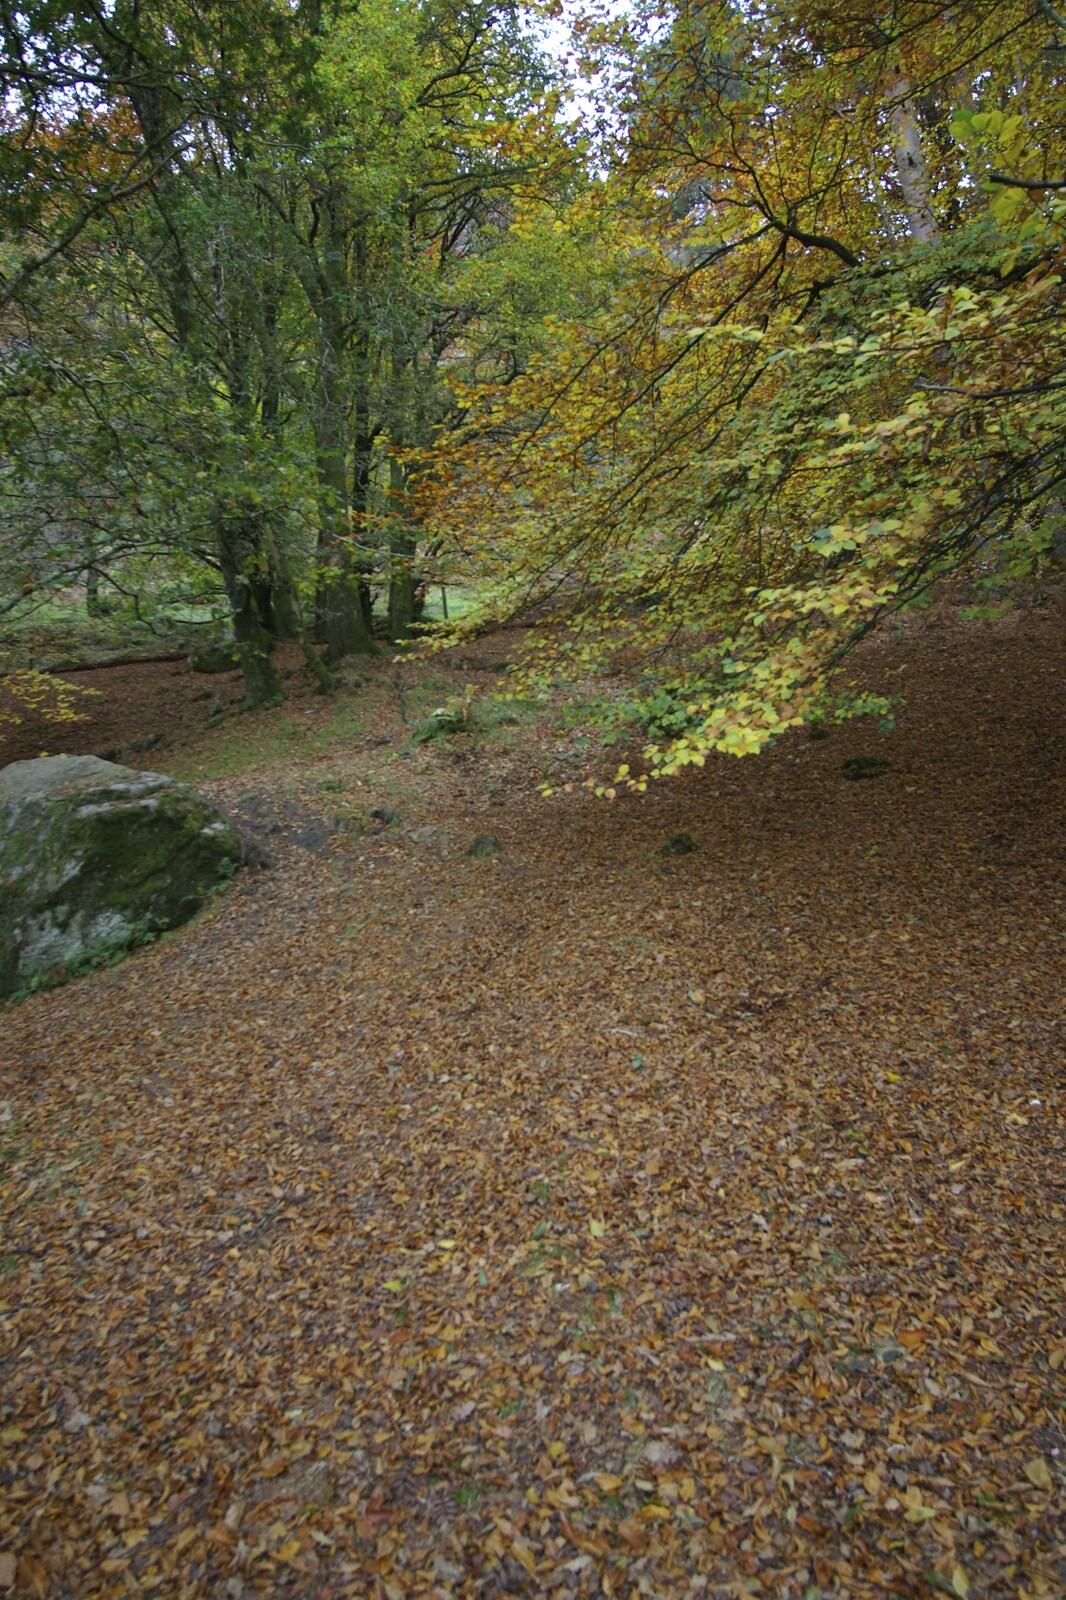 Reflections: A Day at Glendalough, County Wicklow, Ireland - 3rd November 2007: A carpet of fallen leaves provides vivid autumn colours